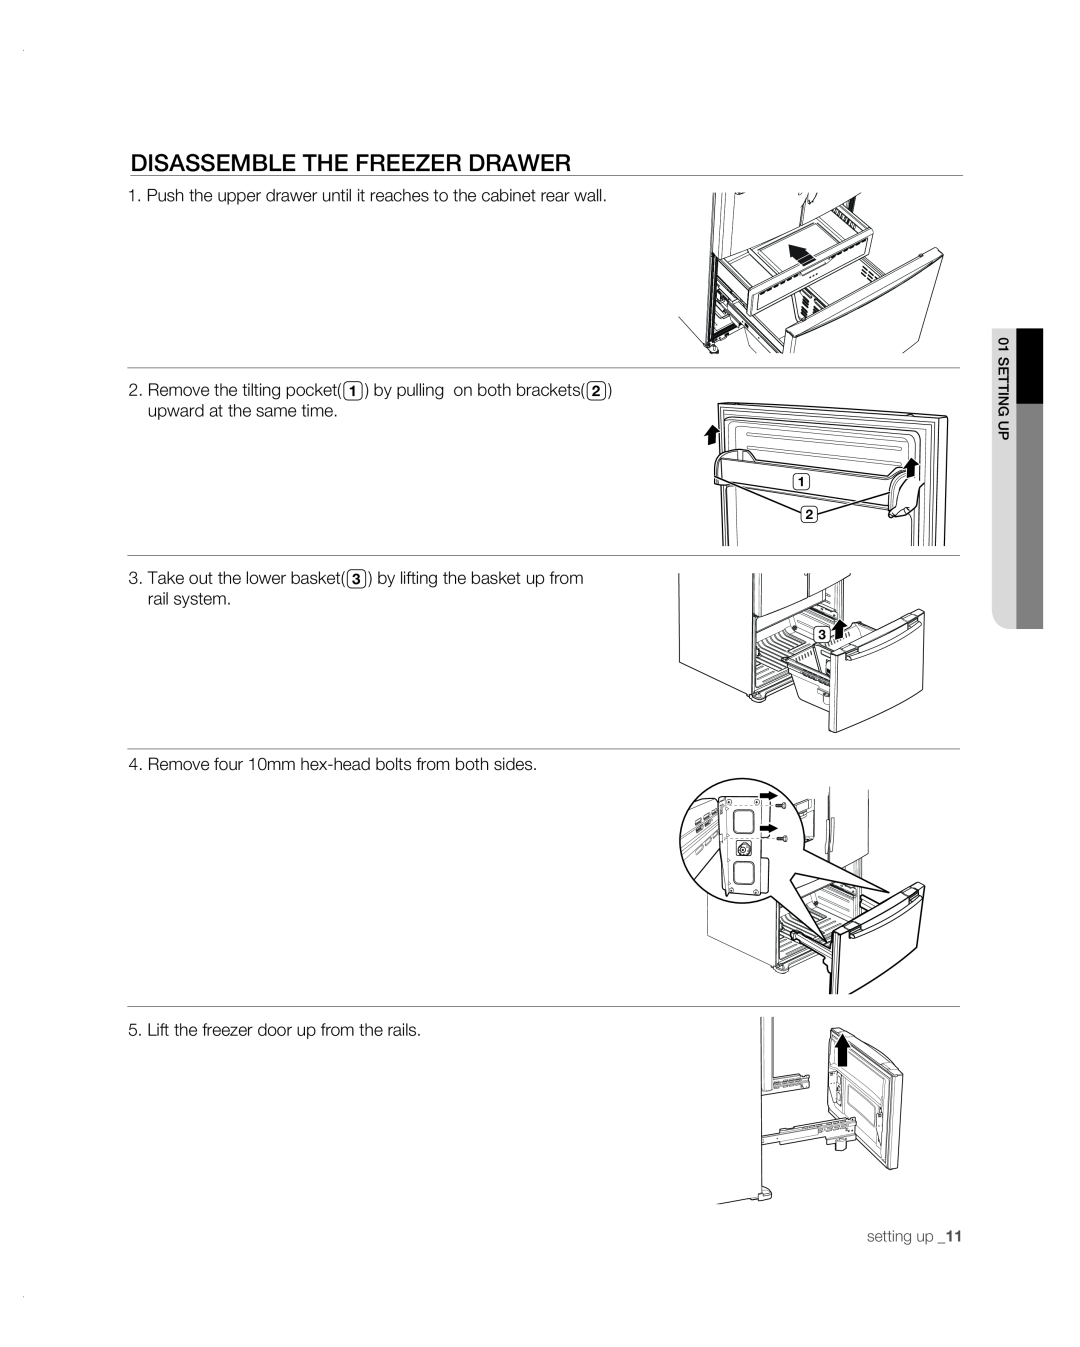 Samsung RF267AB user manual disassemble the freezer drawer, Push the upper drawer until it reaches to the cabinet rear wall 